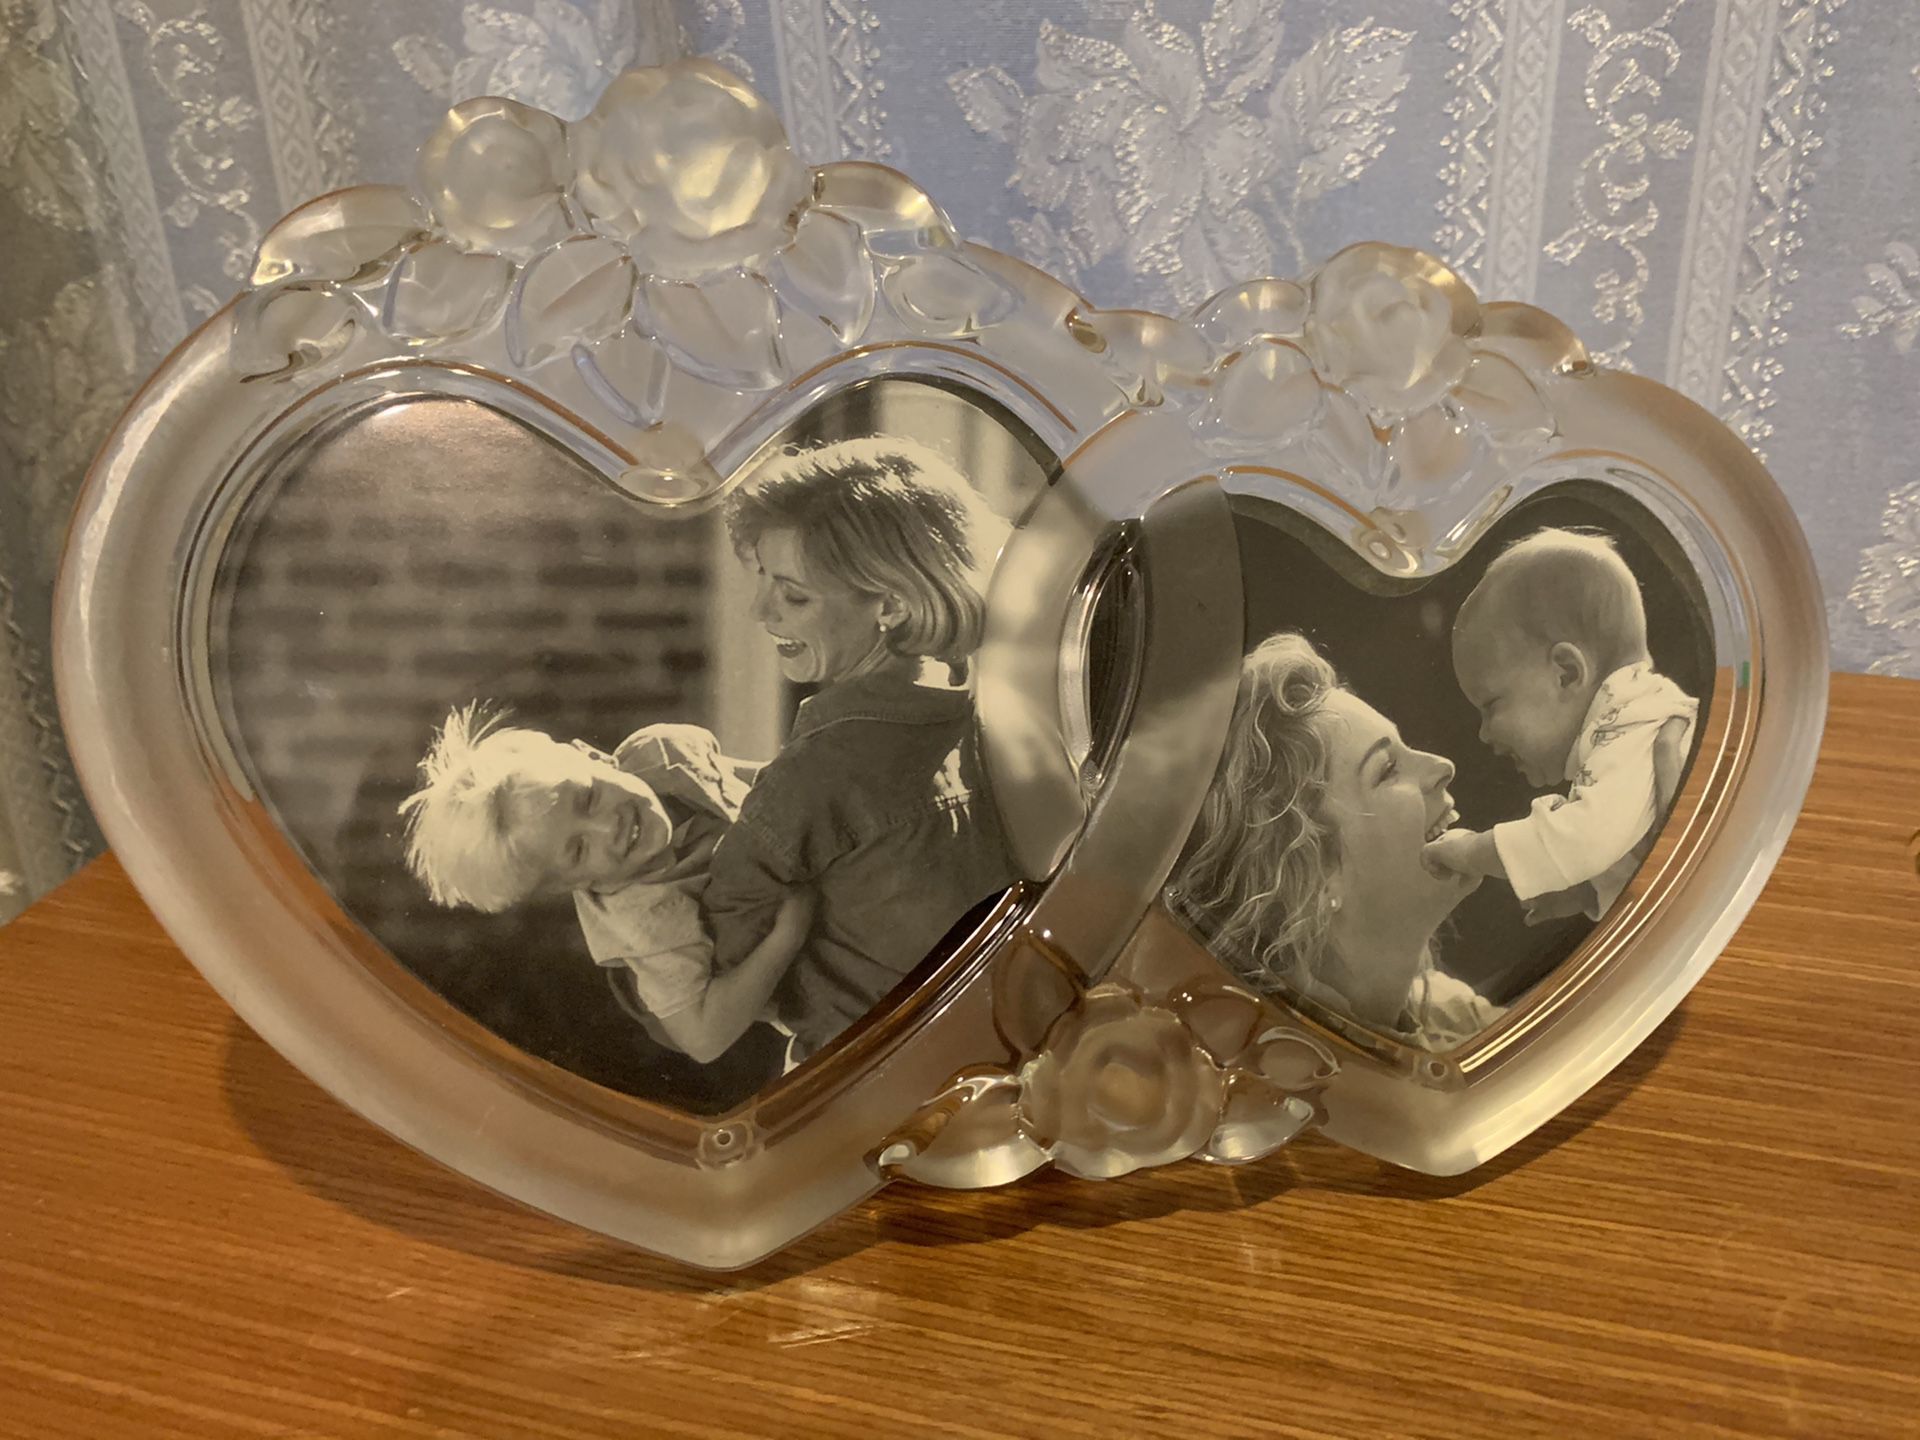 Price Reduced- Beautiful Two Heart Shape Flower Carving Design Glass Photo Frame with Stand